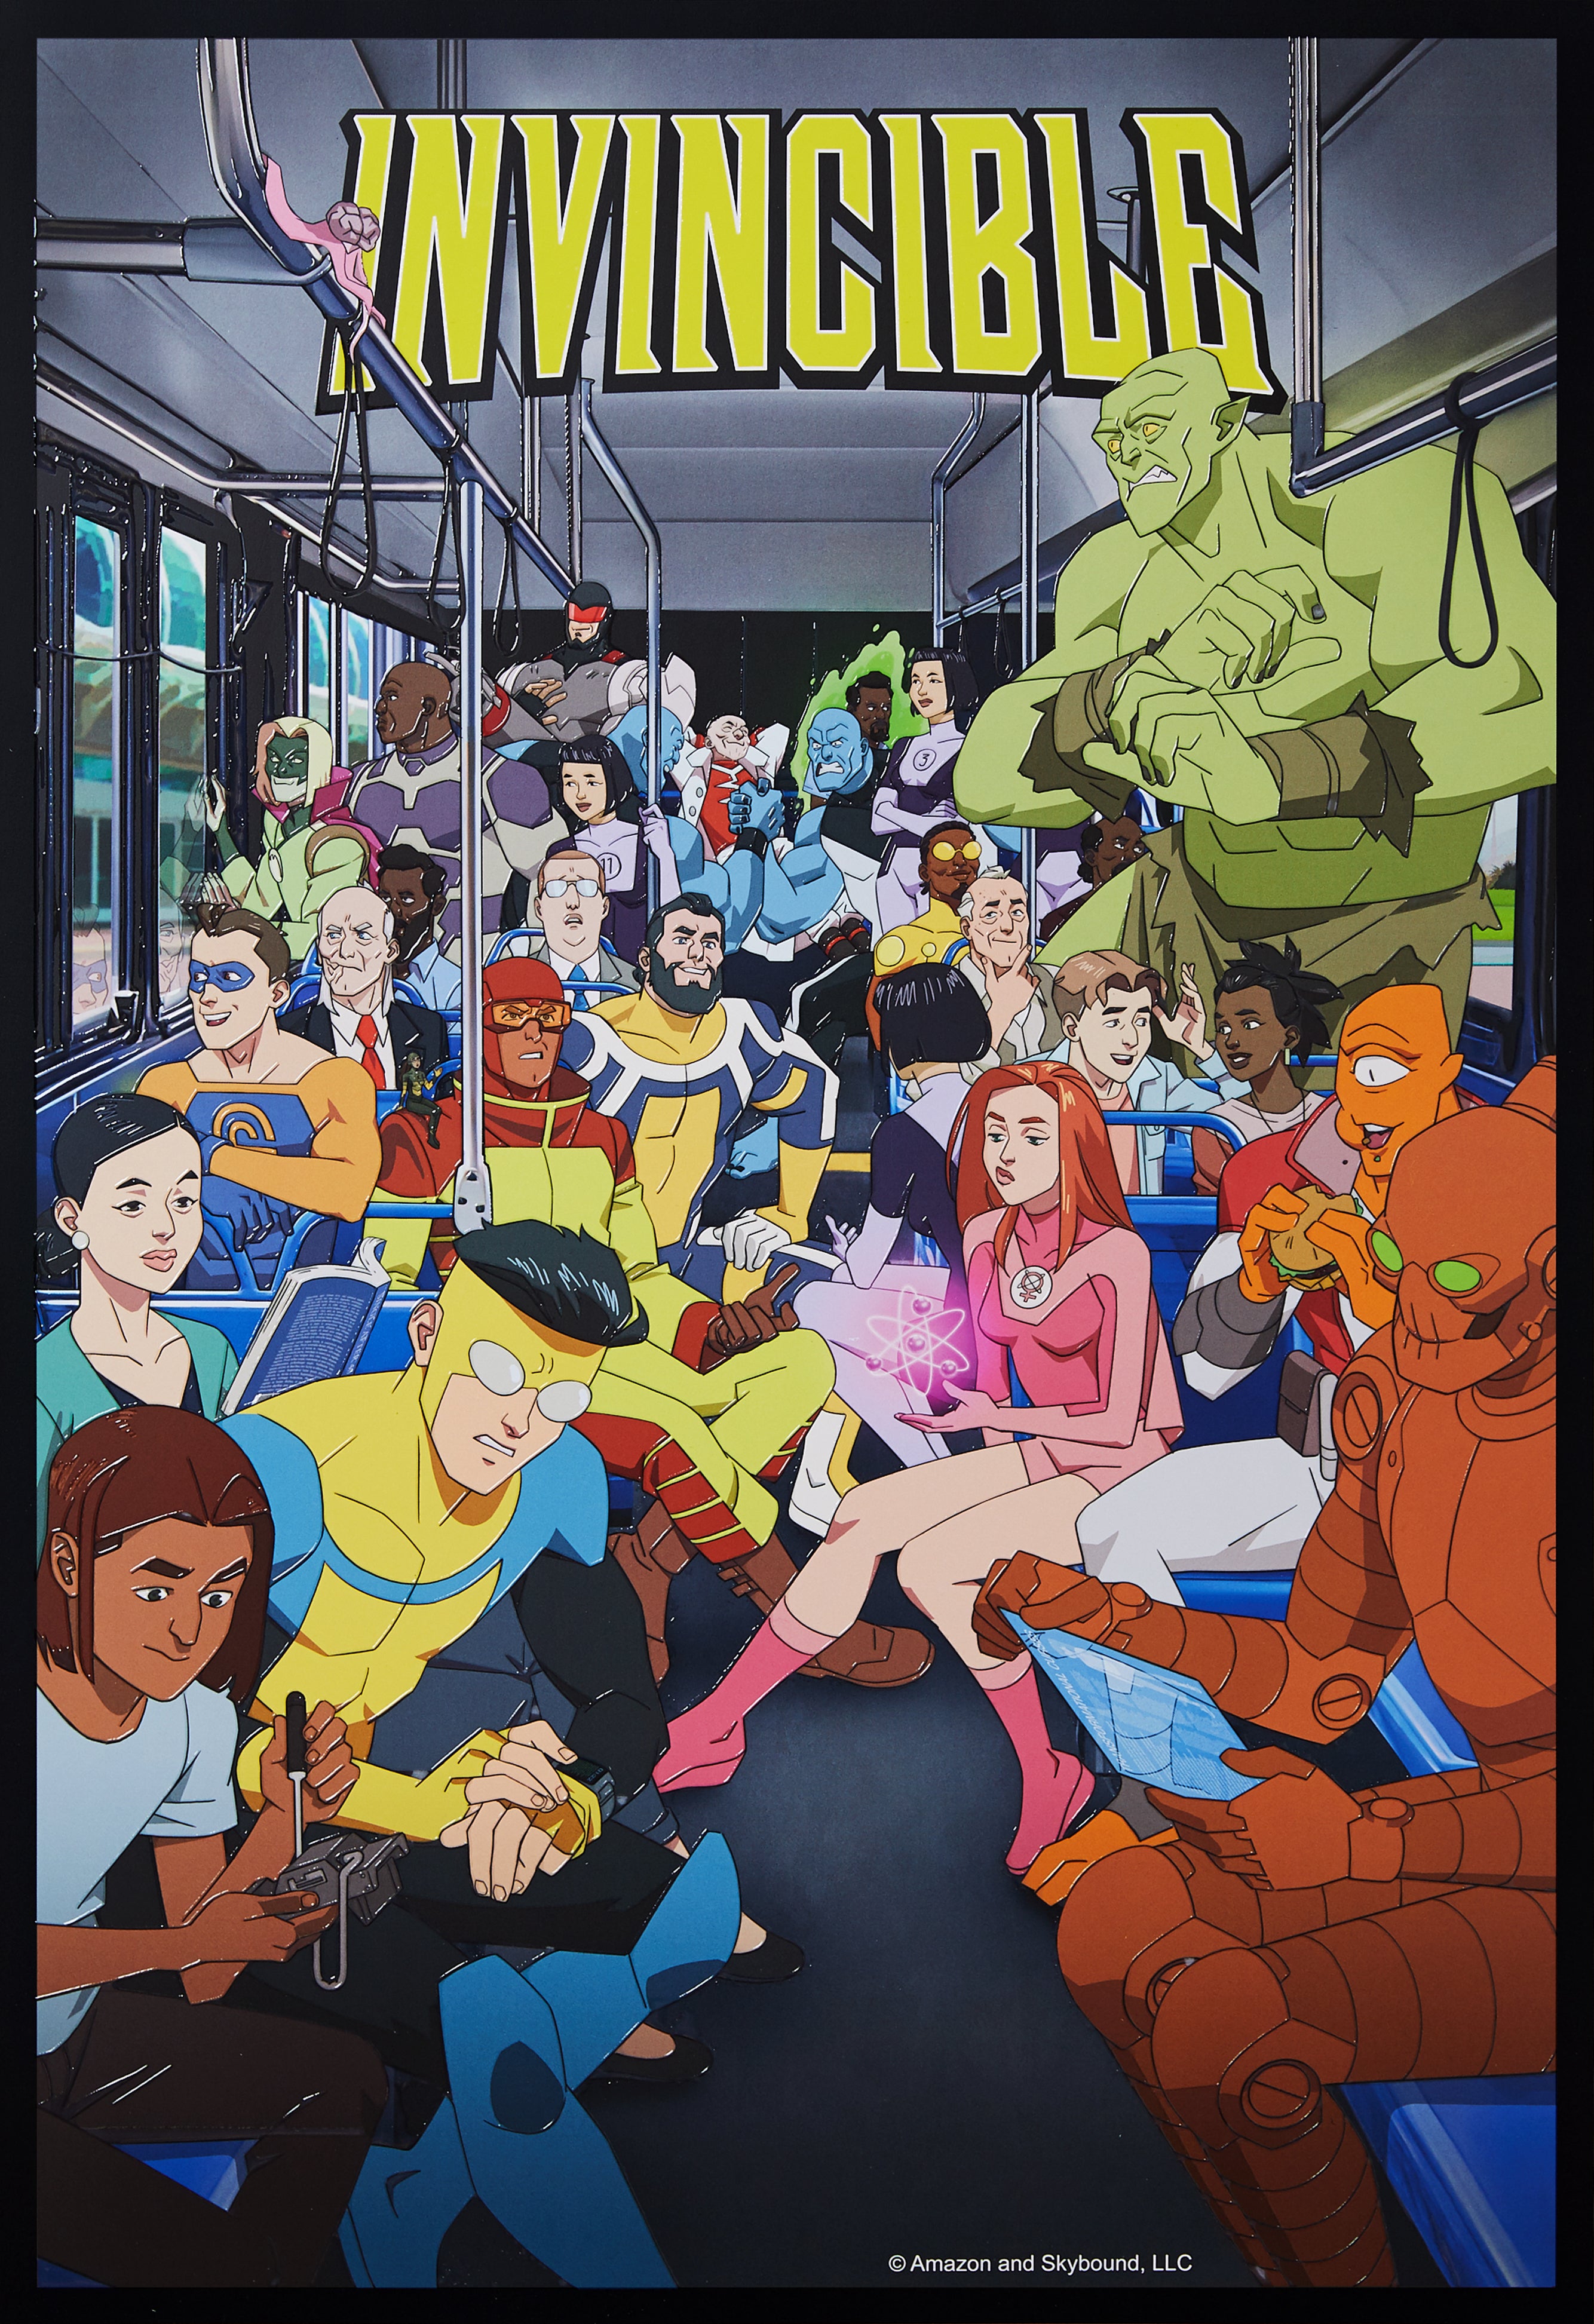 Invincible Season Two Episode Two - Limited Edition Poster - Pre-Order